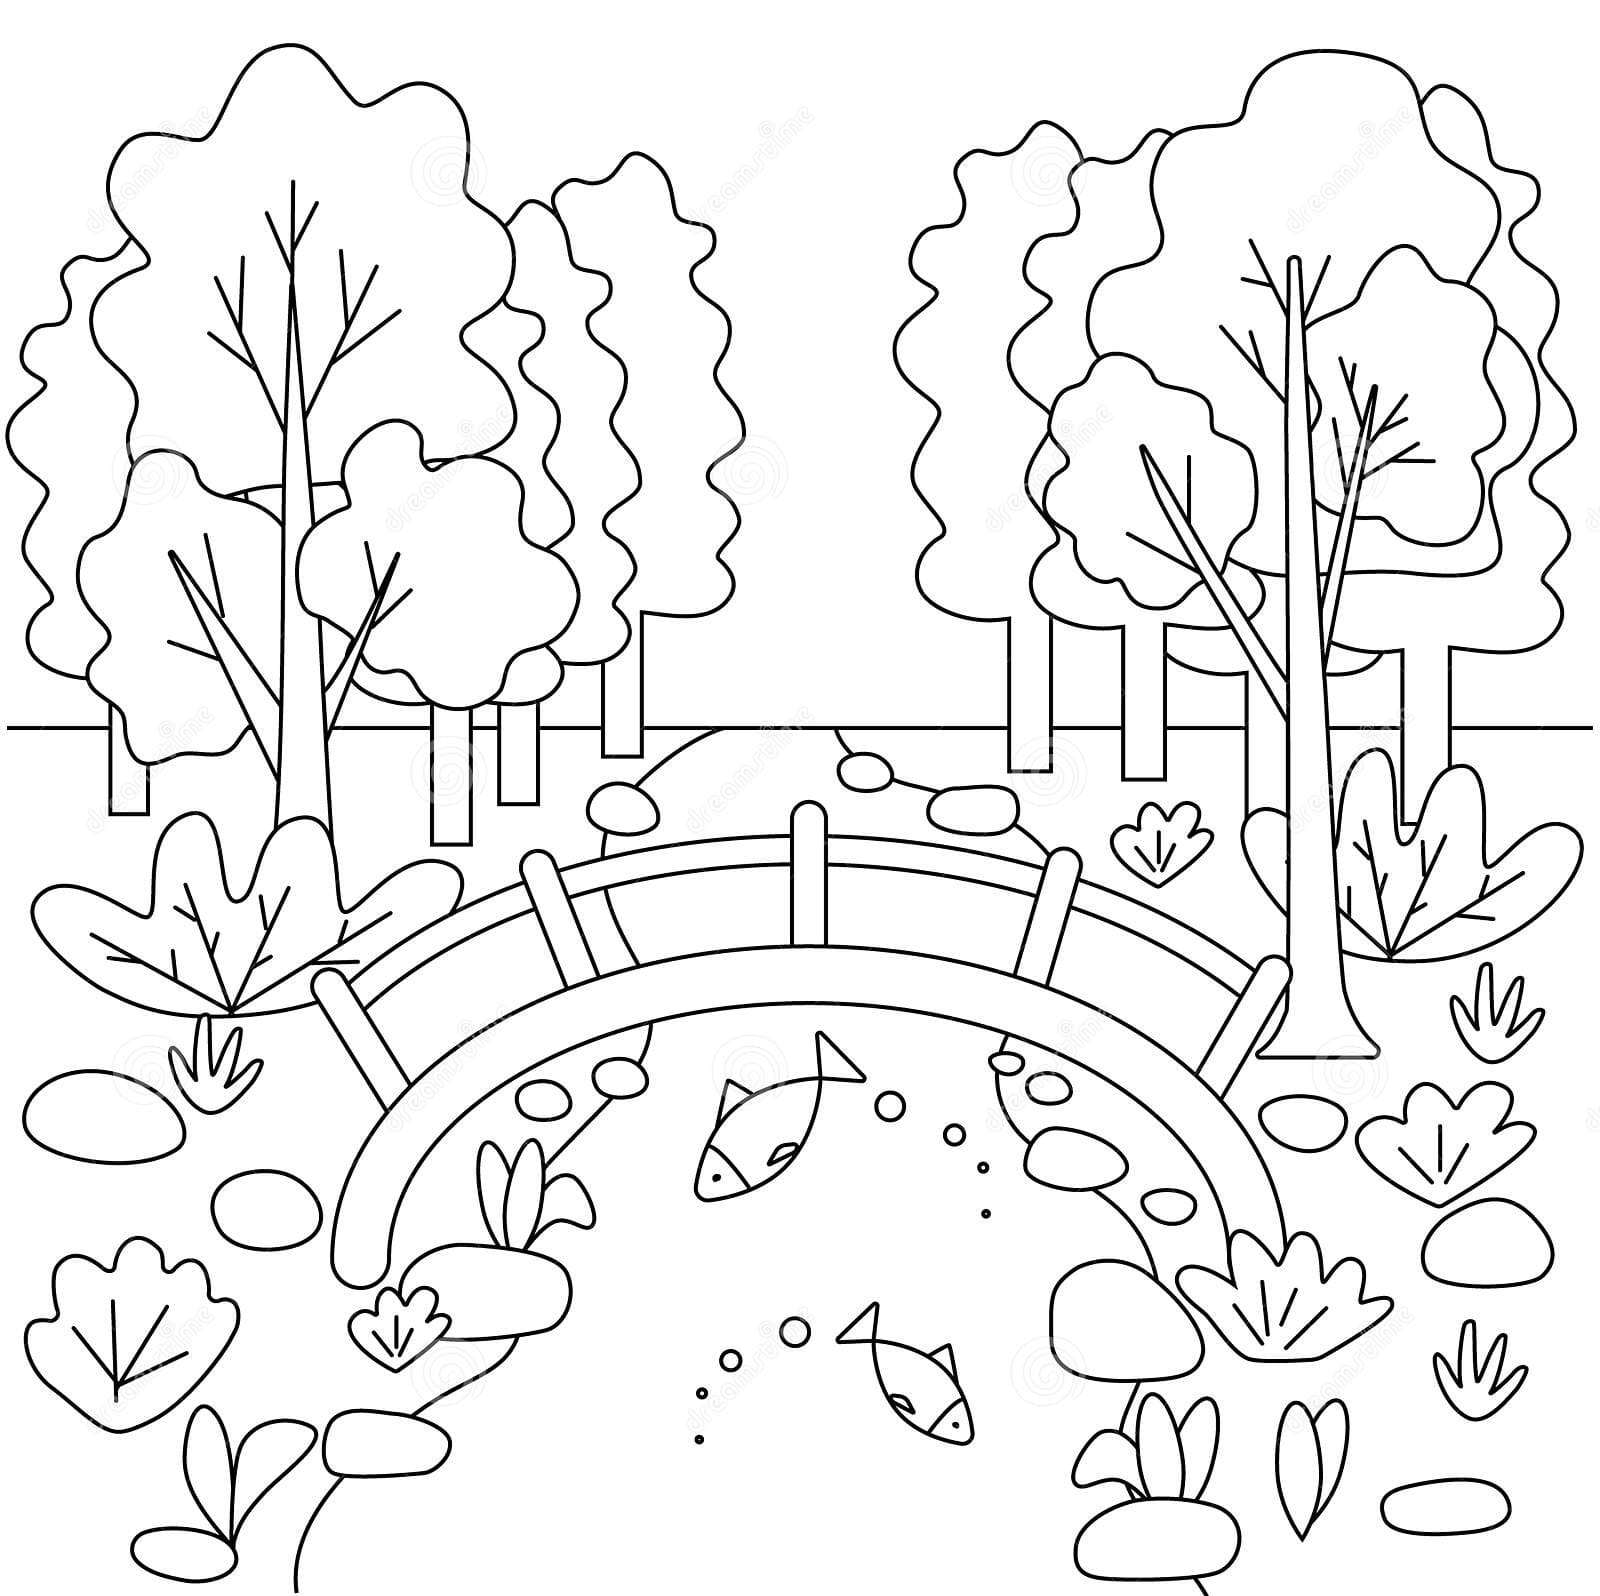 Cute Kids Coloring Book With Landscape